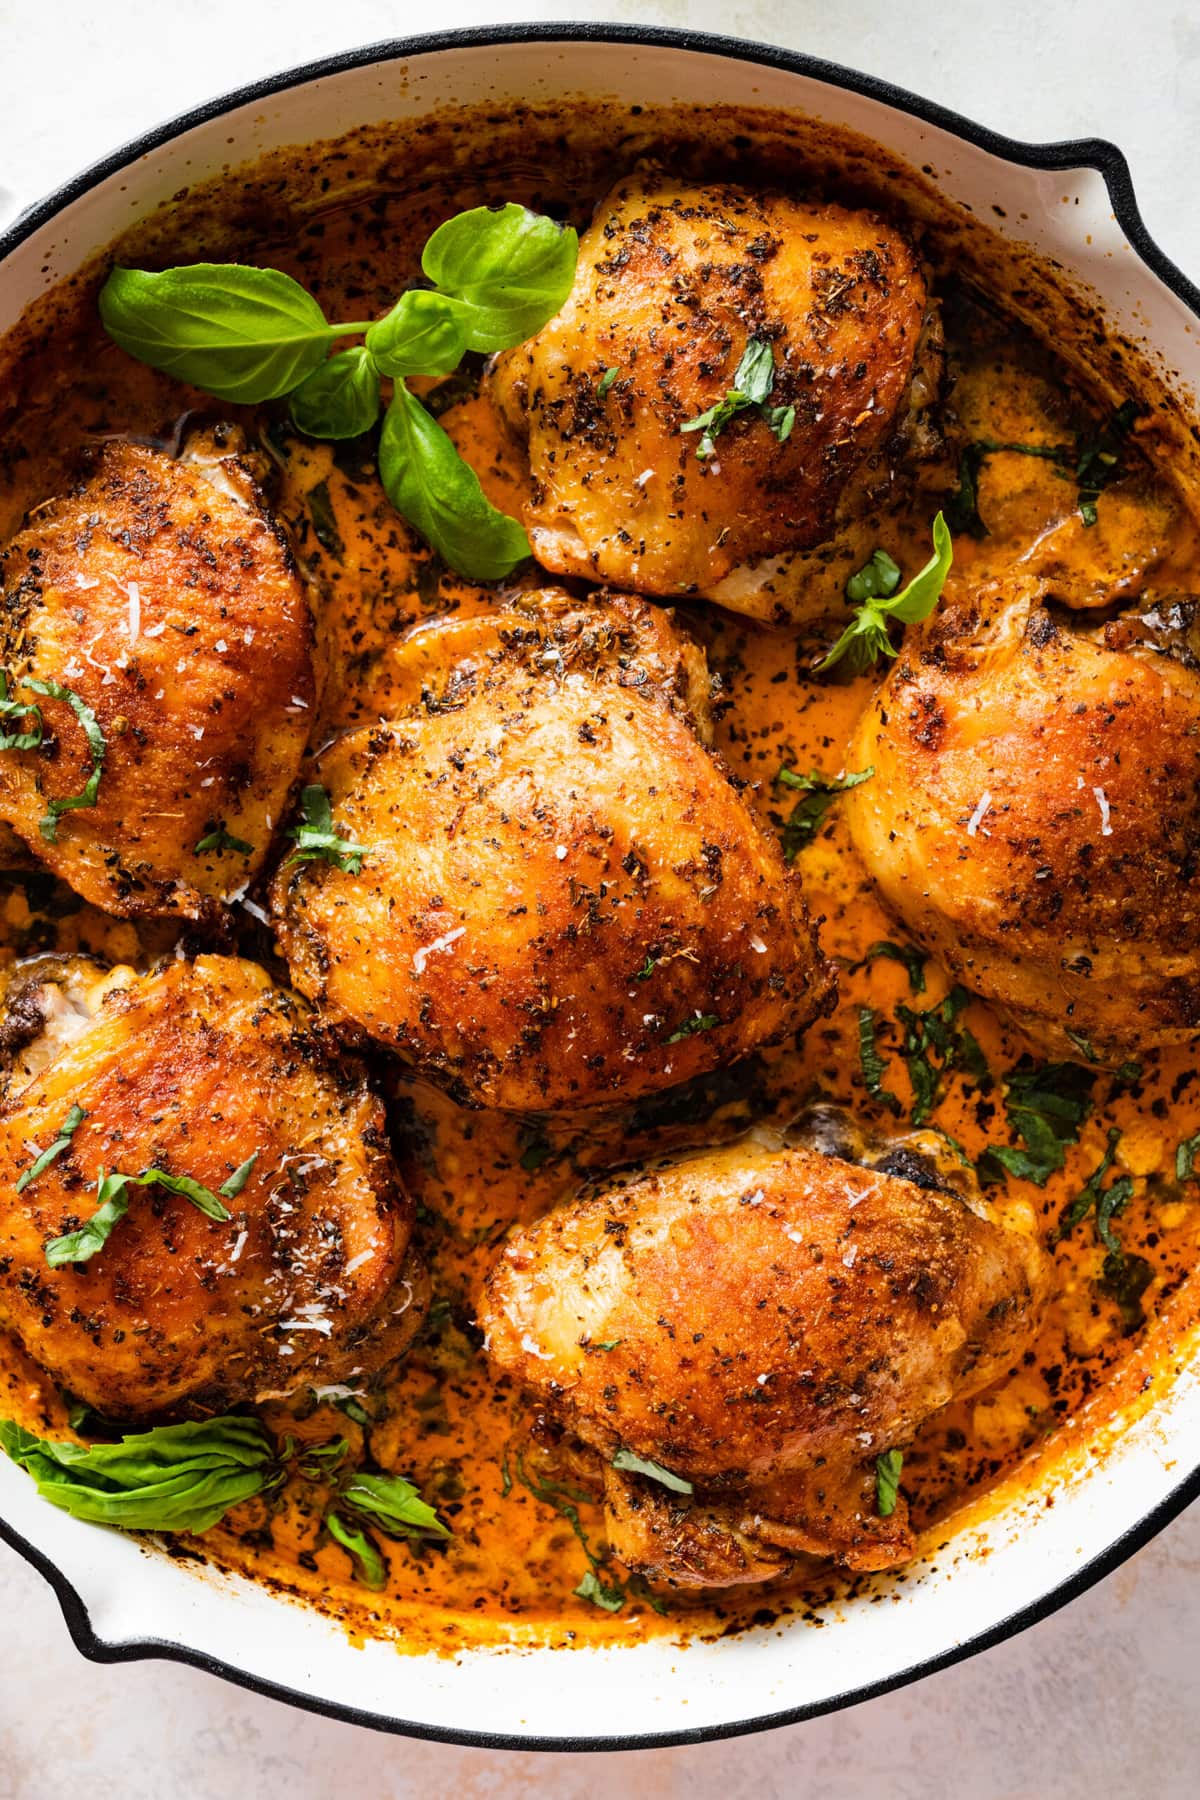 saucy chicken thighs in a pan with sauce. Basil leaves as garnish. 